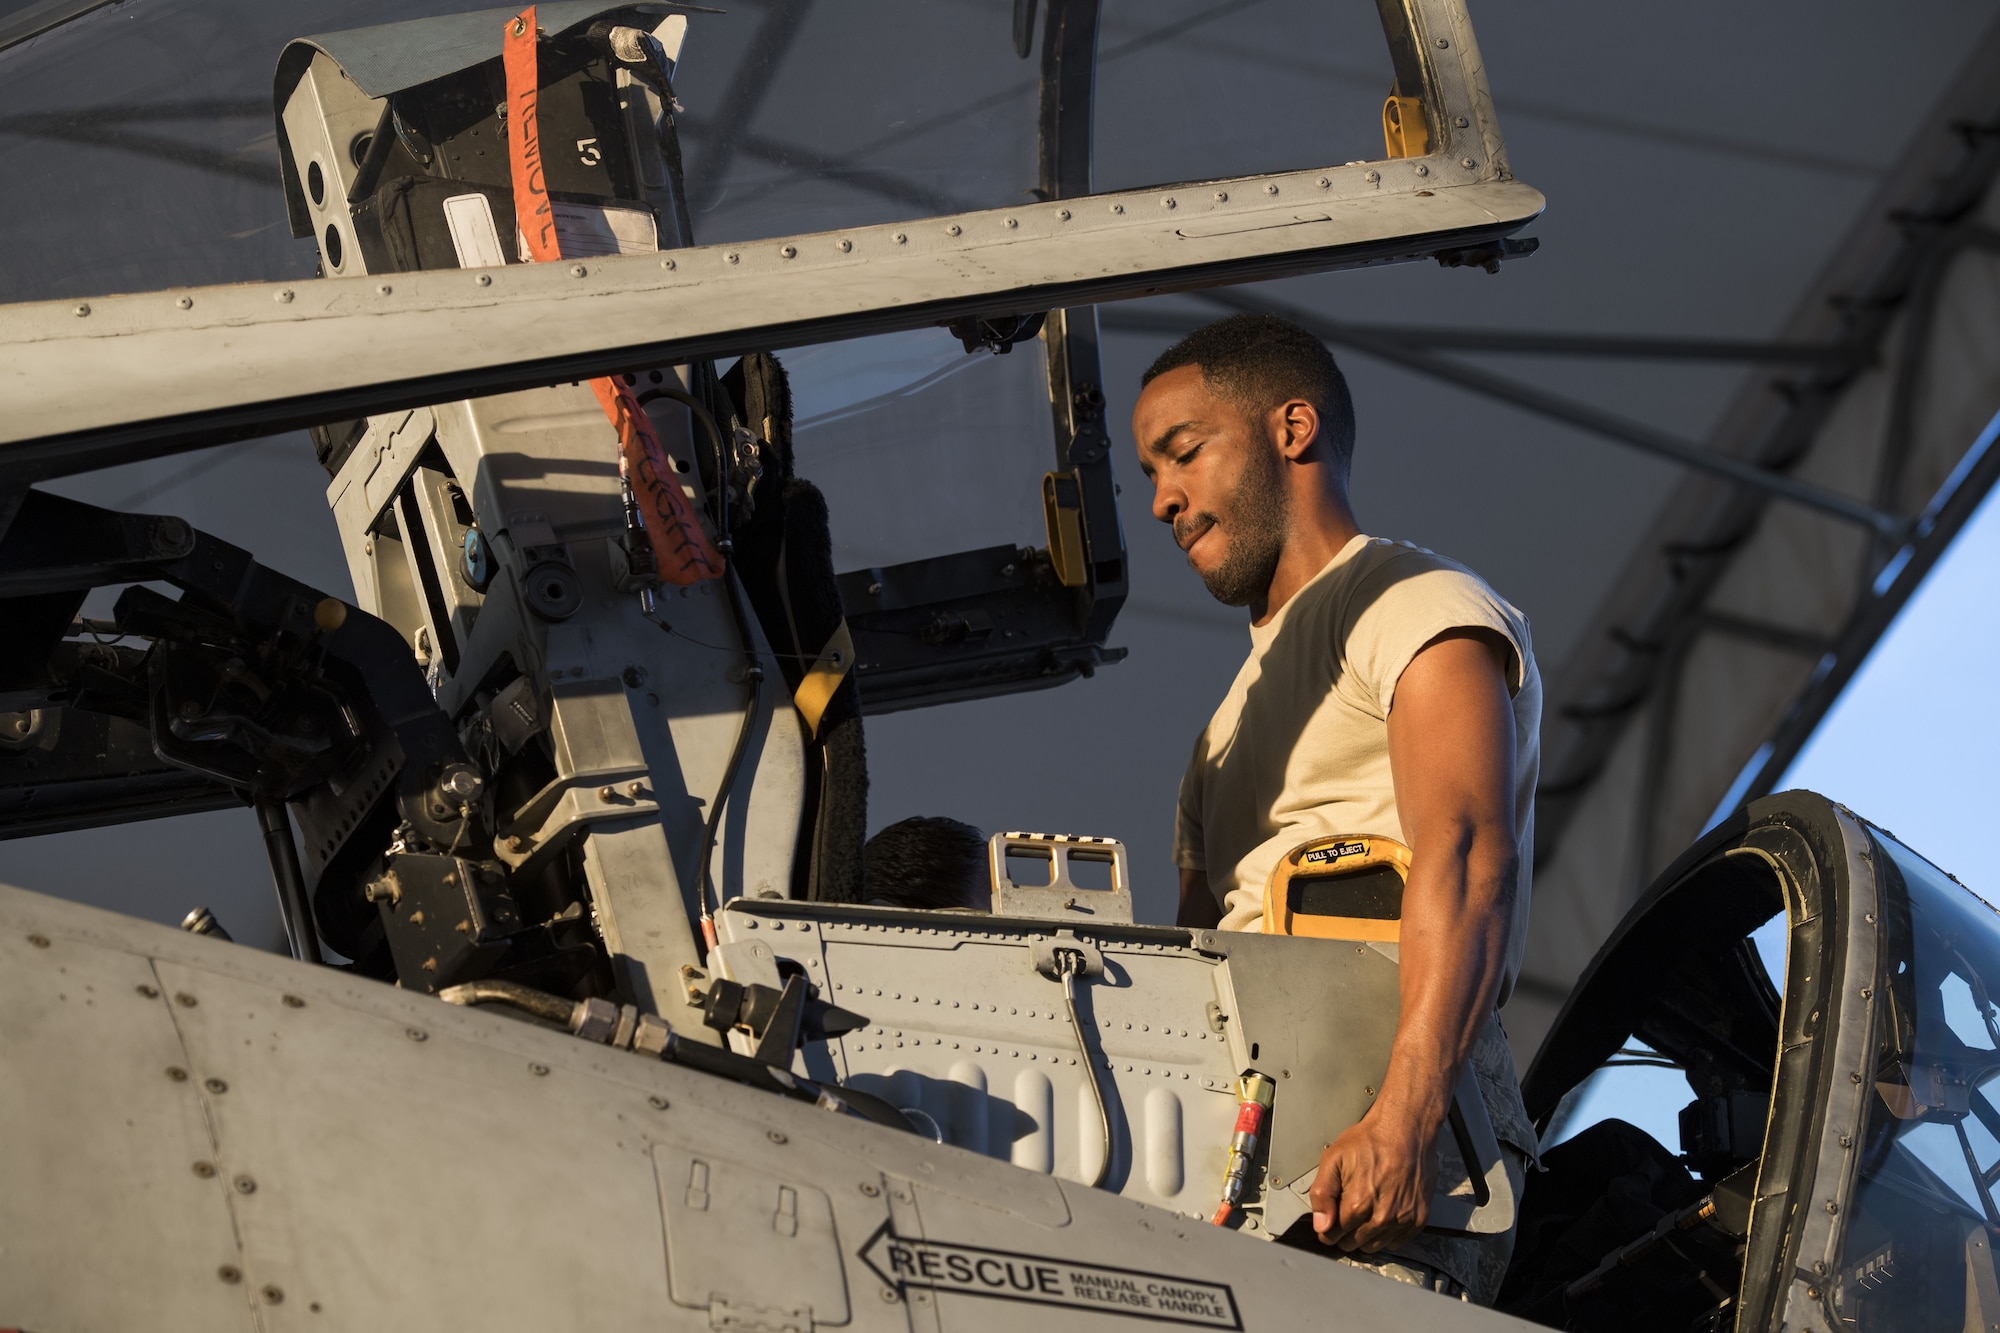 Airman 1st Class Andre Francis, 23d Aircraft Maintenance Squadron  egress apprentice, adjusts a seat in the cockpit of an A-10C Thunderbolt II during an exercise, Dec. 5, 2017, at Moody Air Force Base, Ga. During Moody’s Phase 1, Phase 2 exercise, leadership tested Airmen across maintenance units on their abilities to accurately and efficiently ready aircraft and cargo to deploy. The exercise tasked Airmen from various aircraft maintenance units (AMU) to generate 16 aircraft from Moody’s fleet of A-10C Thunderbolt II’s. (U.S. Air Force photo by Senior Airman Janiqua P. Robinson)